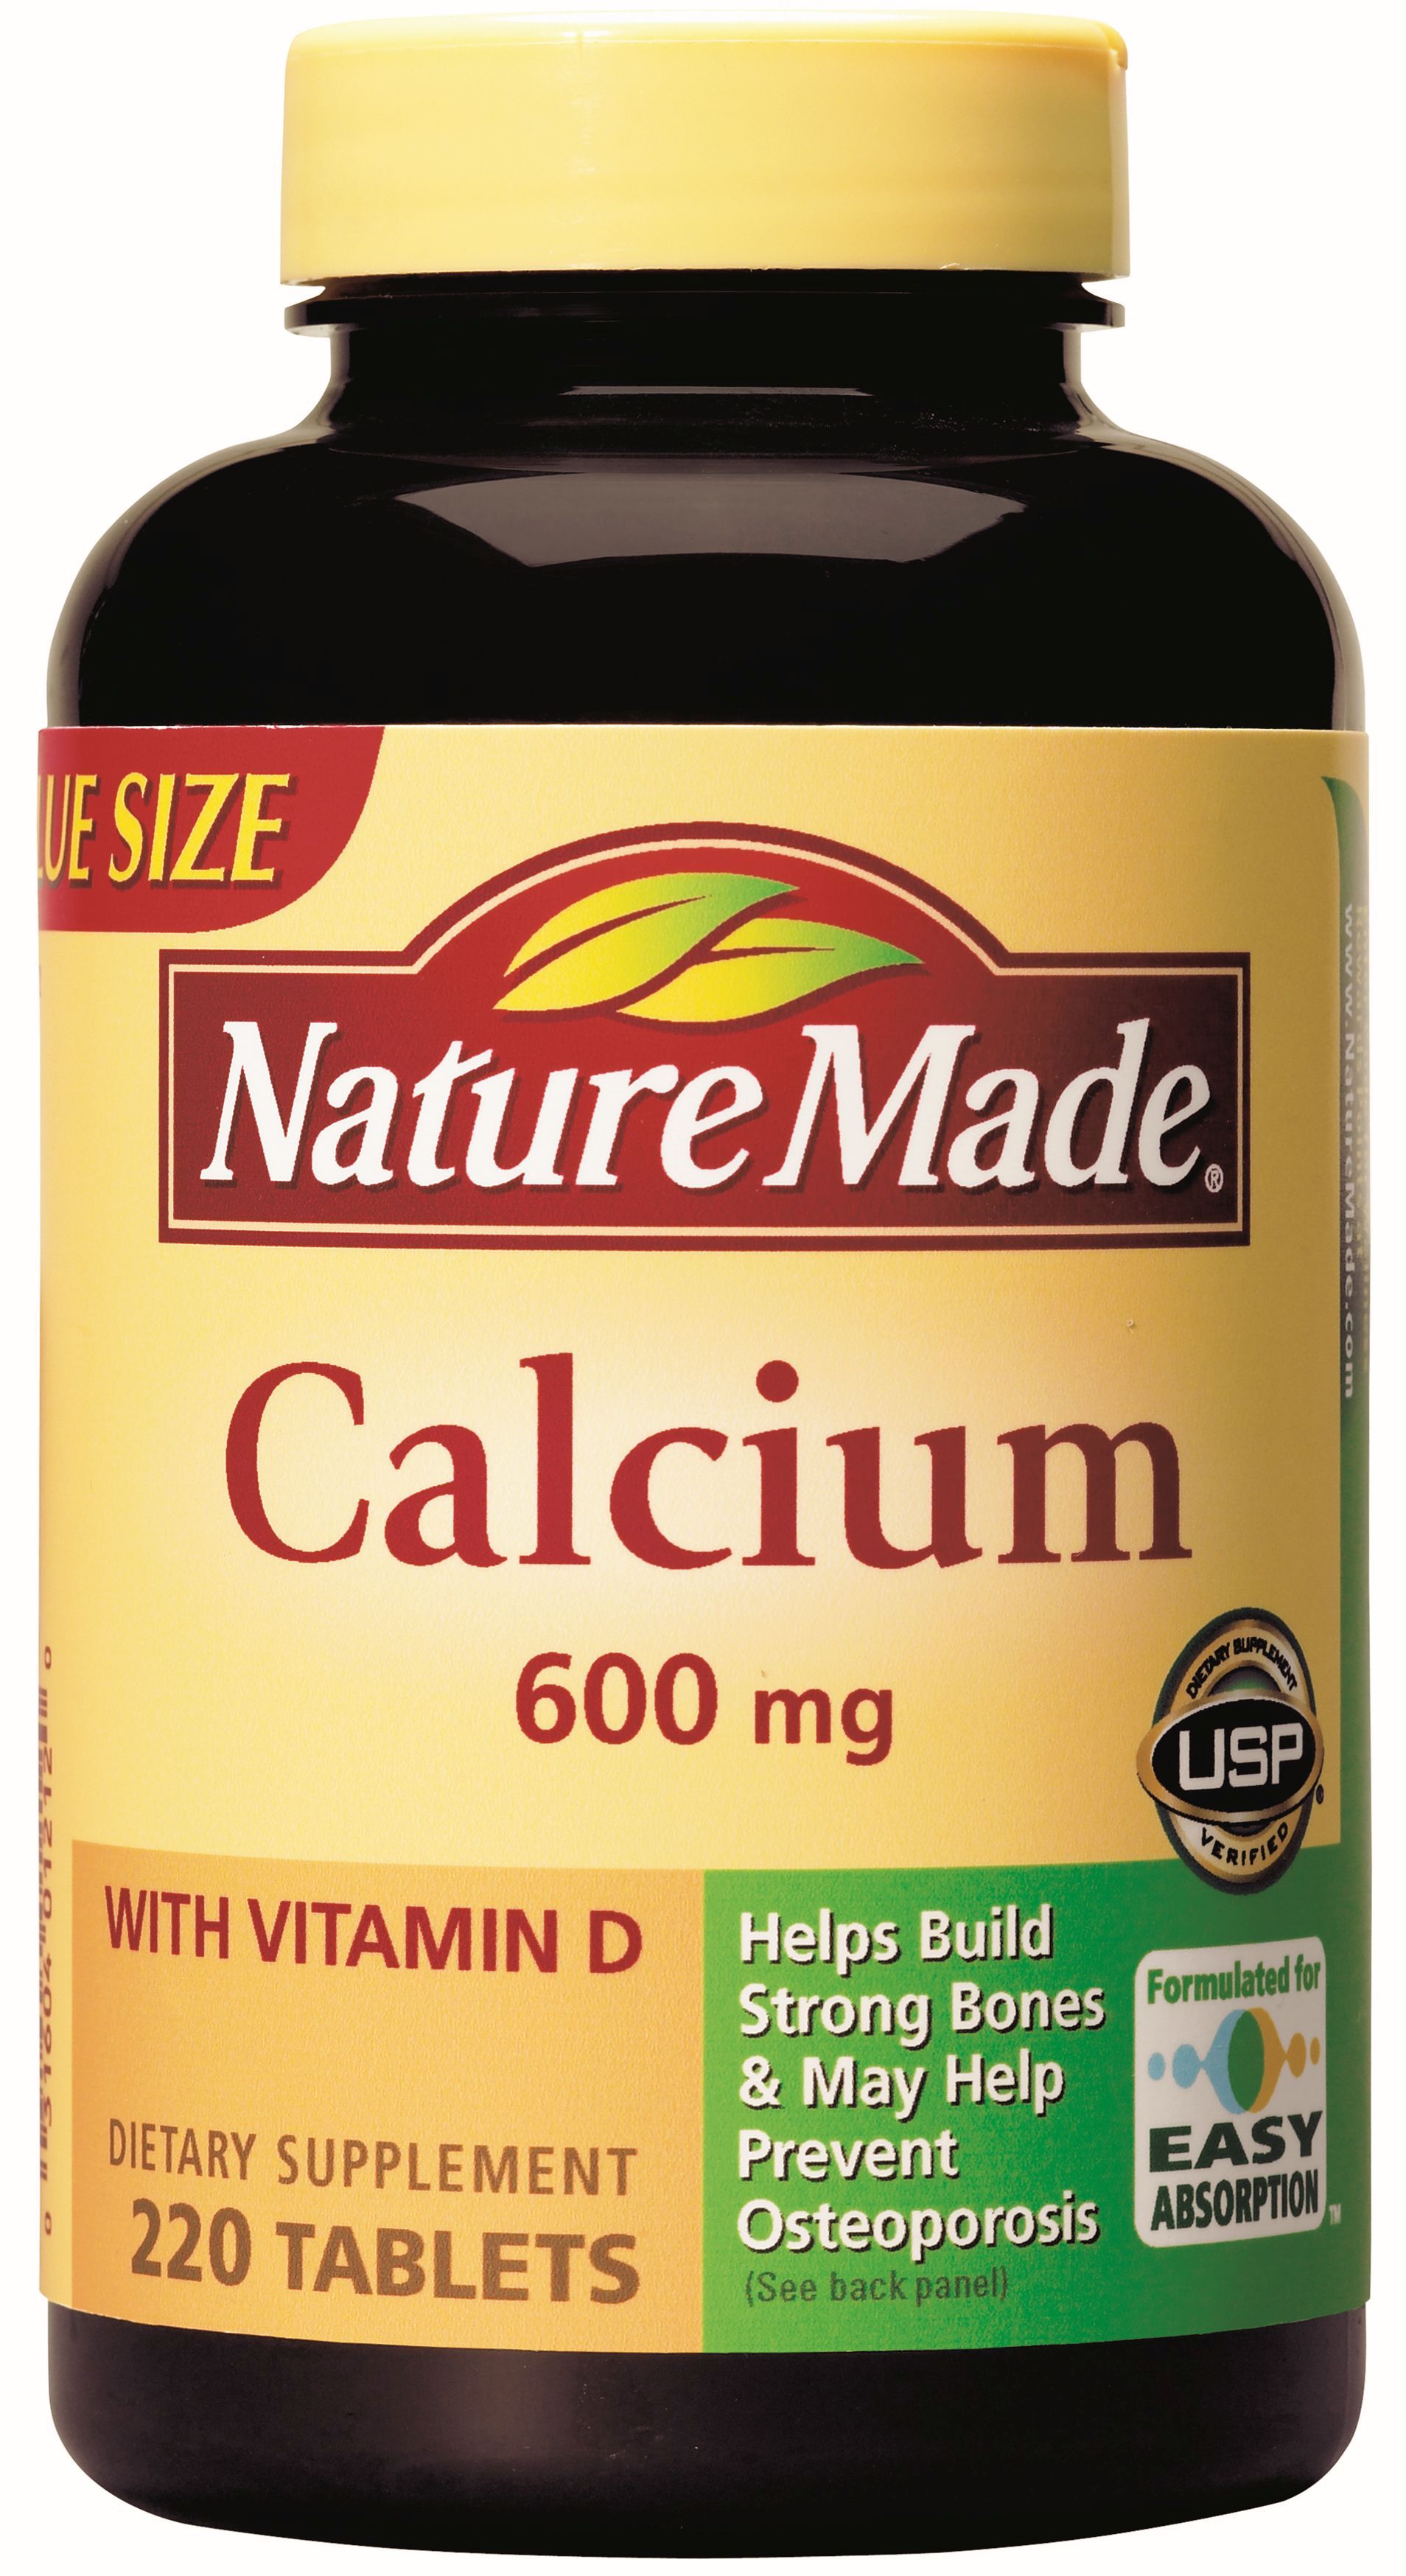 Nature Made Calcium 600 mg with Vitamin D, 220 Tablets